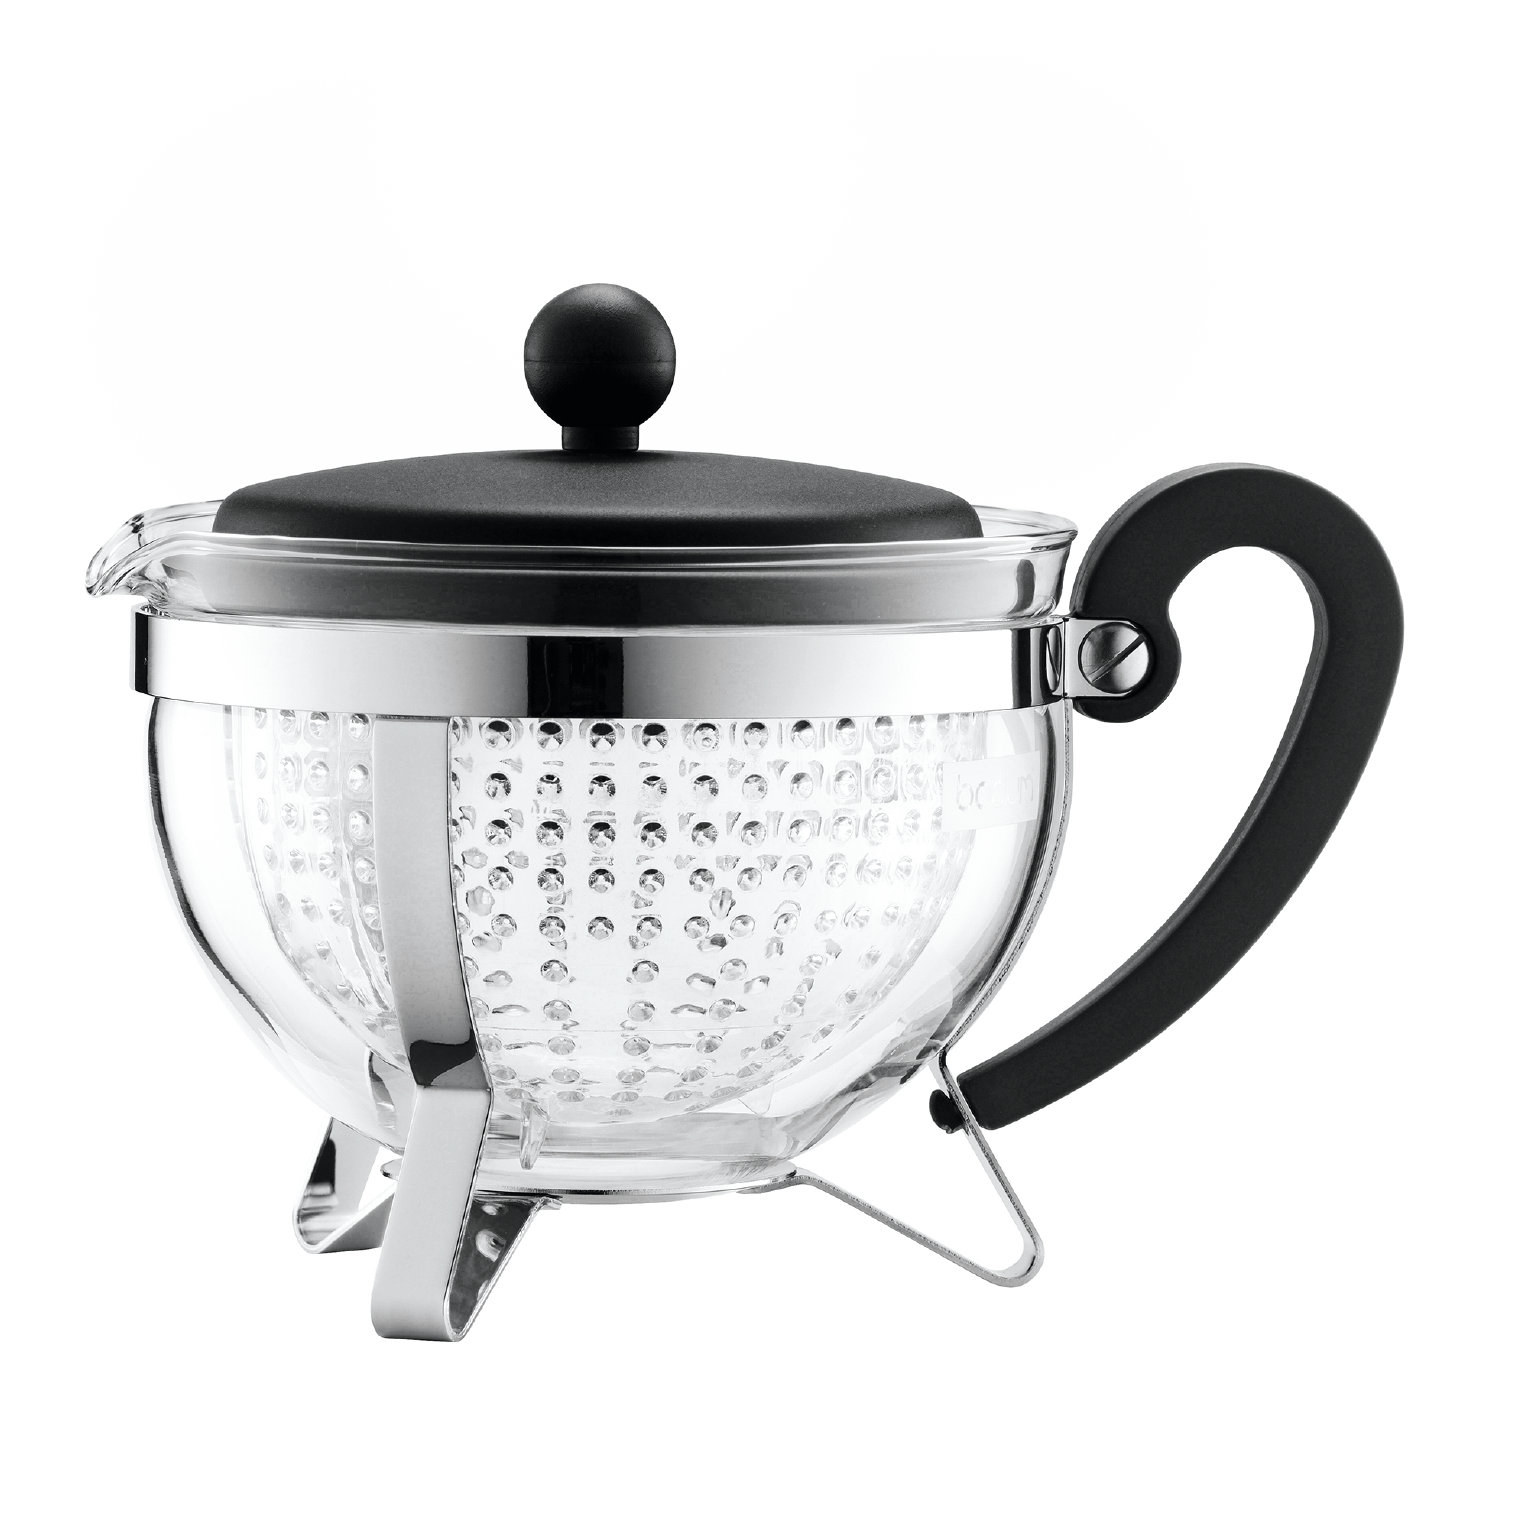 Bodum Chambord Teapot Kettle with Removable Infuser & Reviews | Wayfair